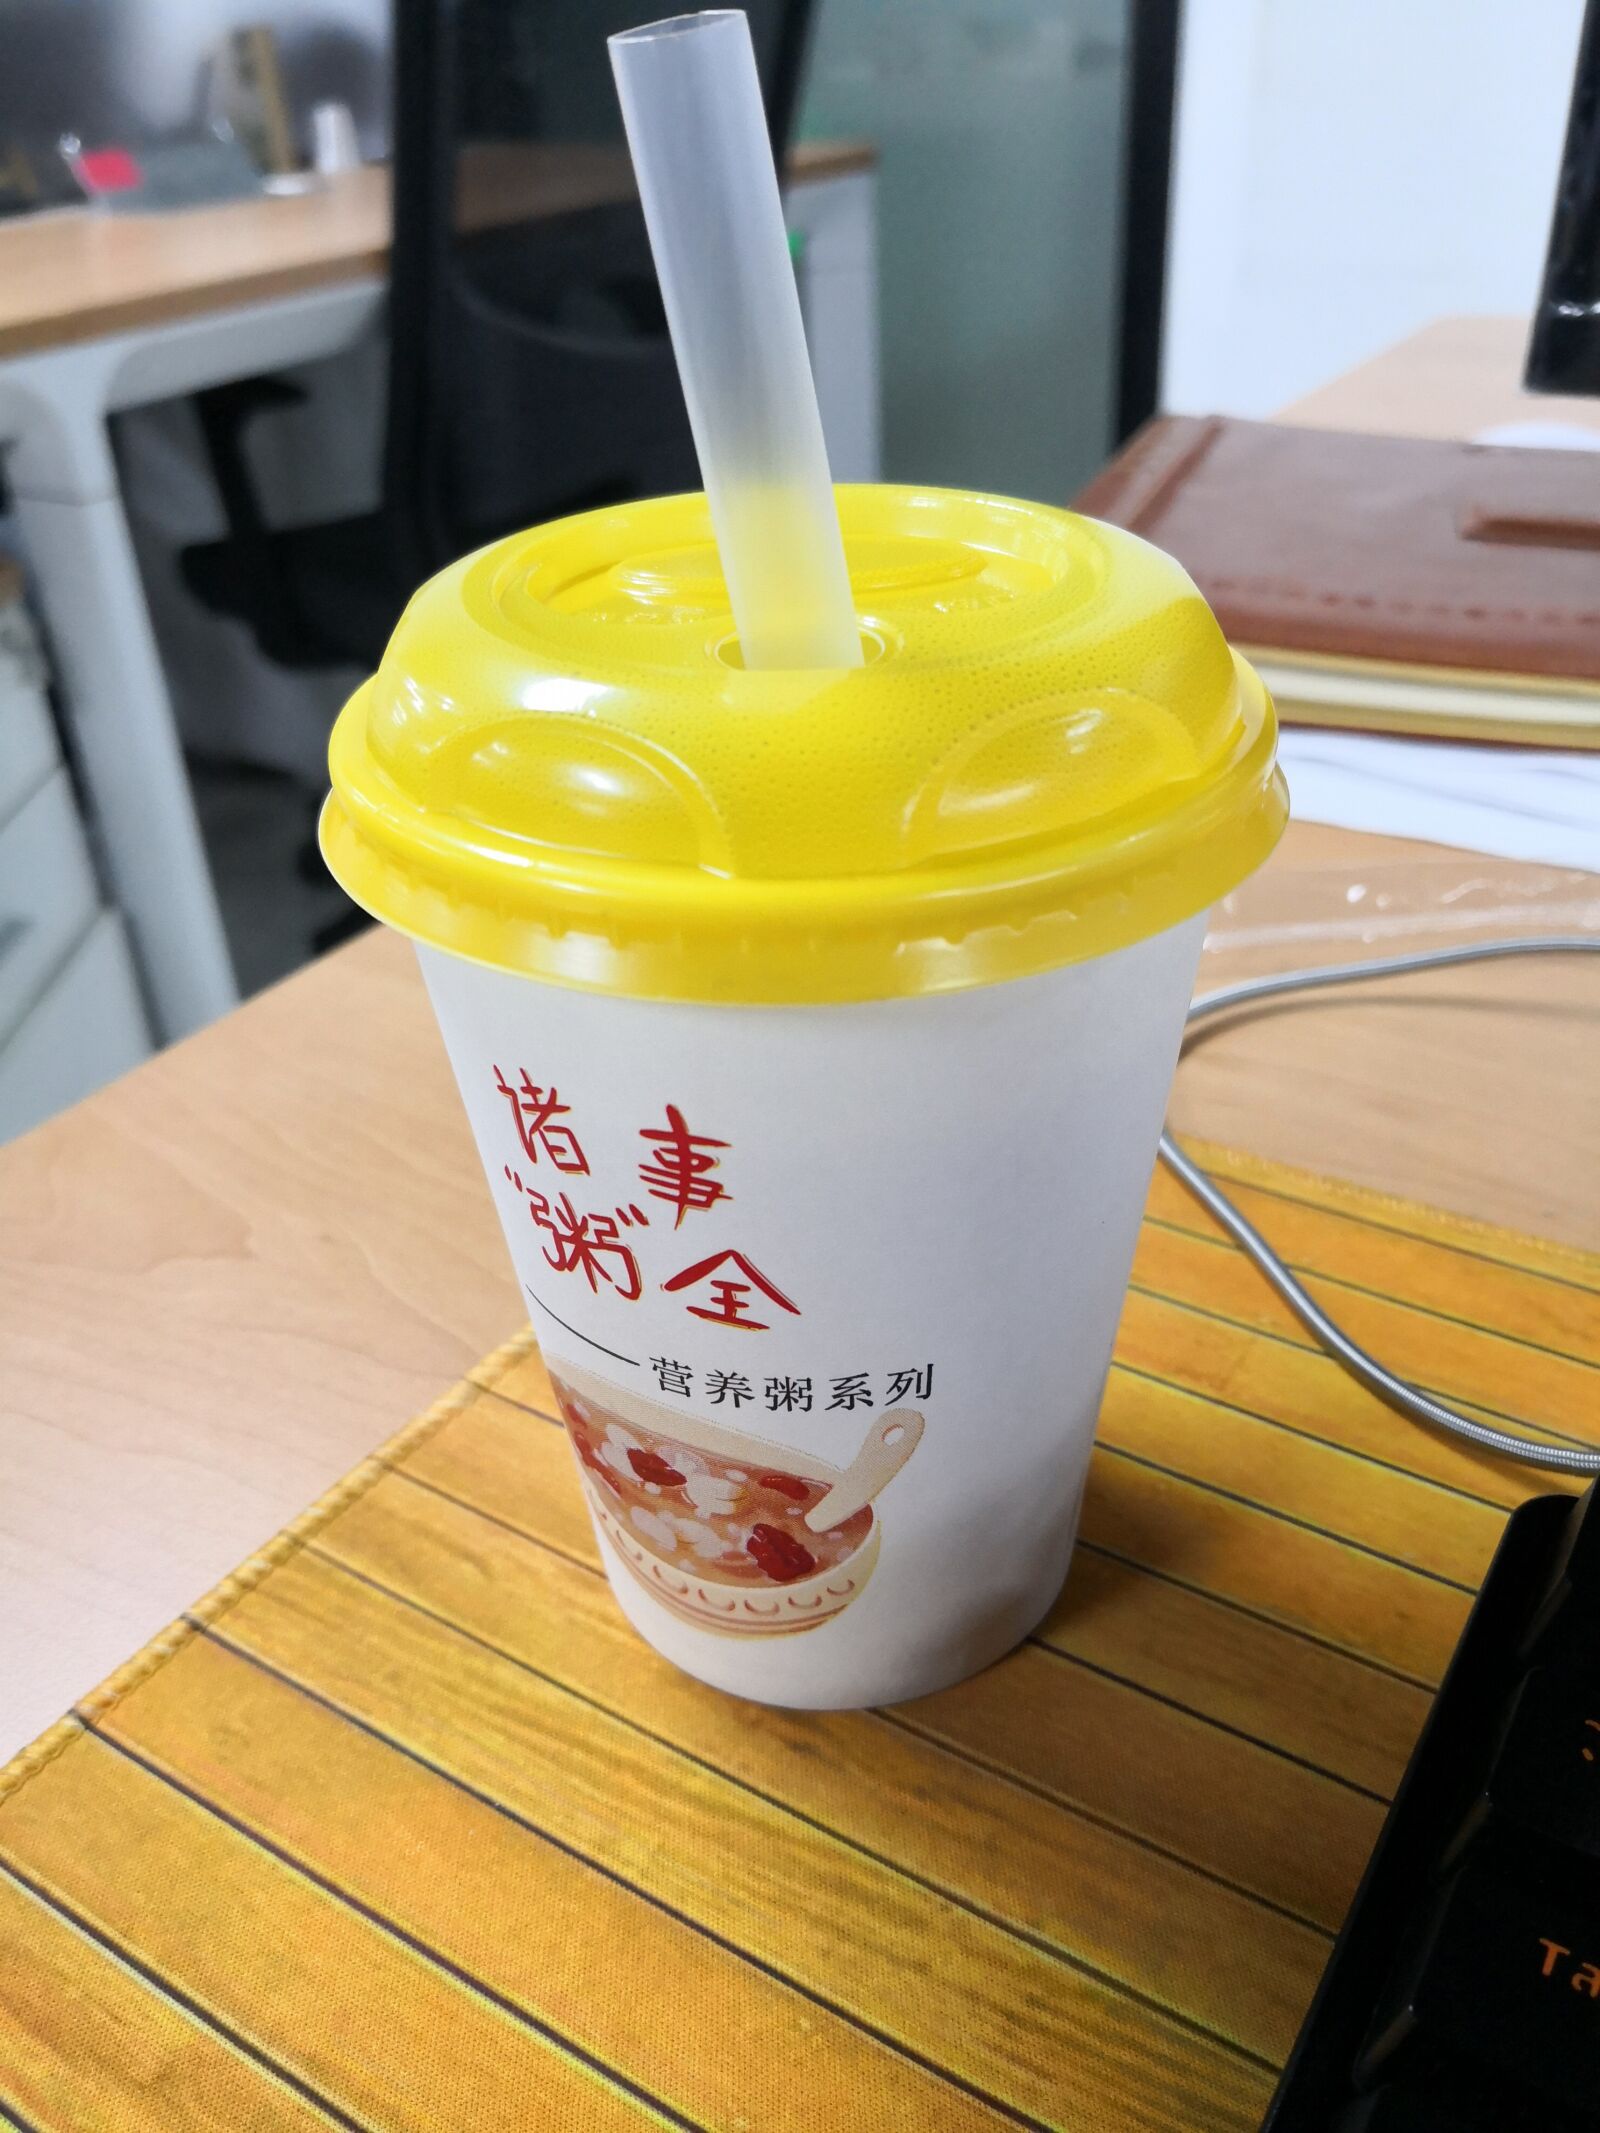 HUAWEI Mate 10 sample photo. Milk tea, tables, drinking photography